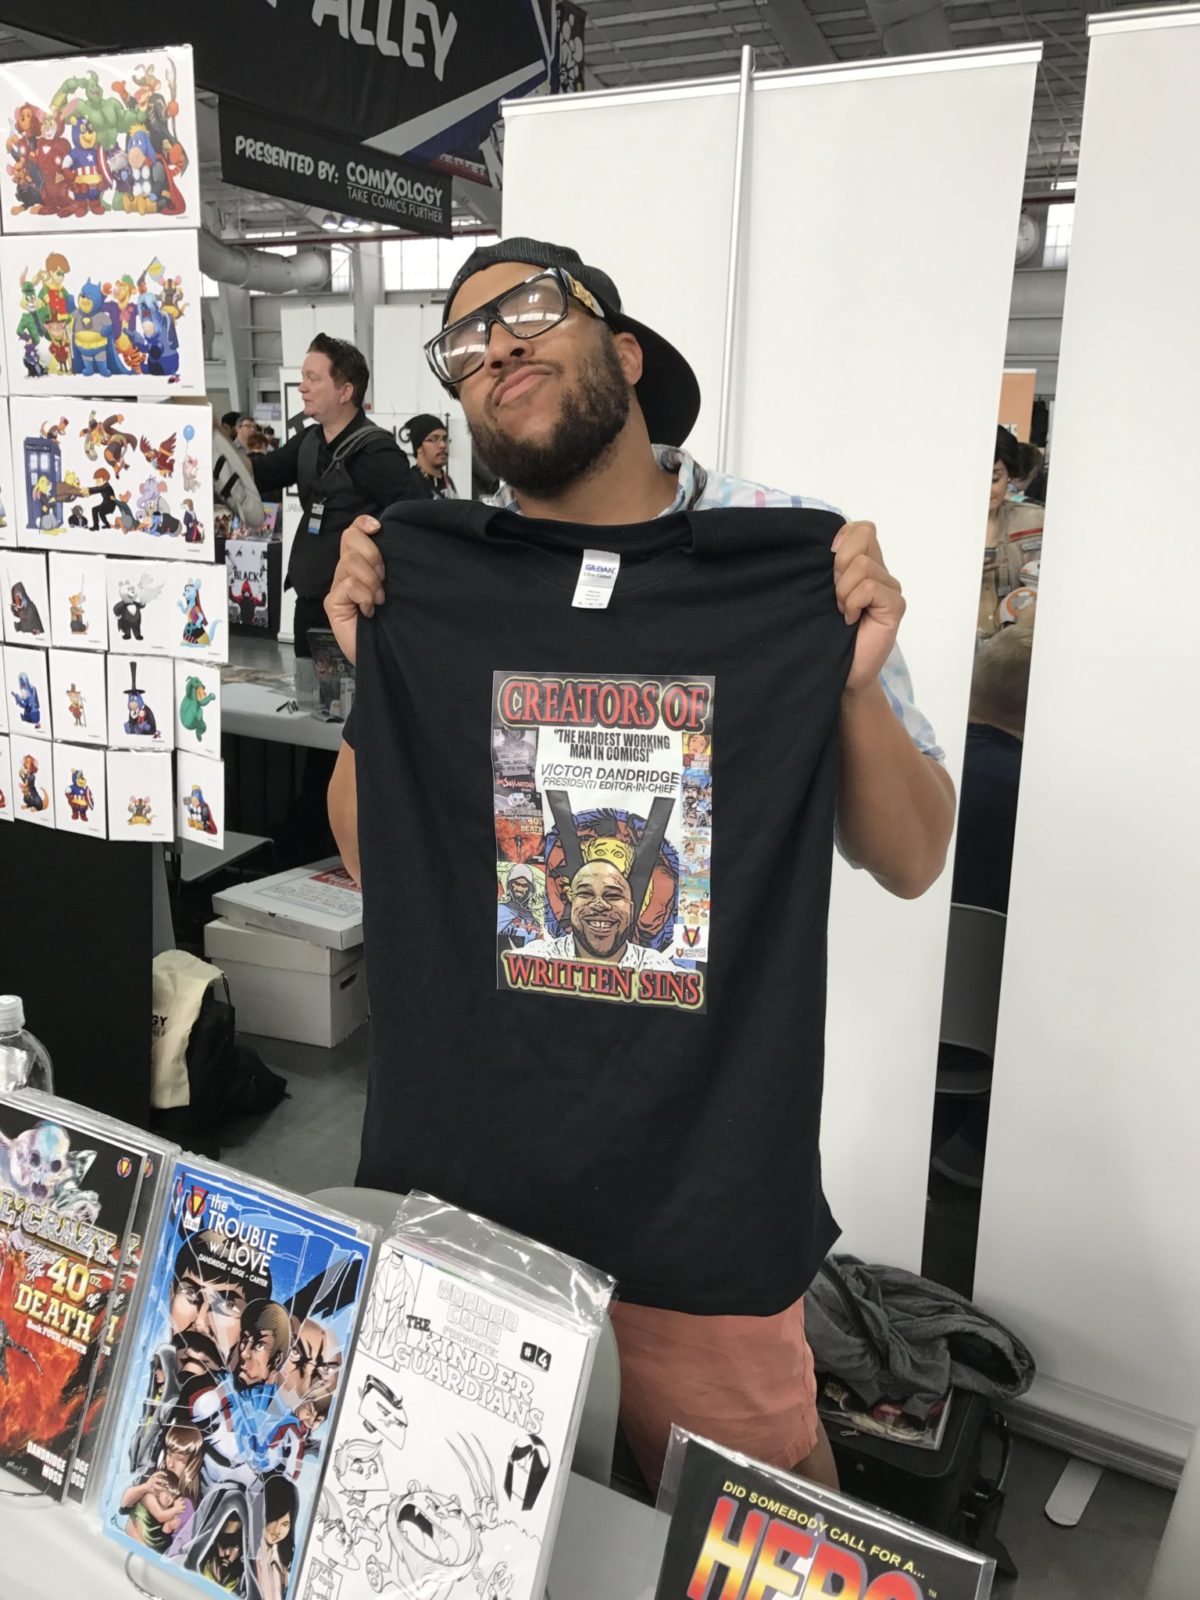 LIVE FROM NYCC VICTOR DANDRIDGE JR IS A King of Cons and he shows it at NYCC  .